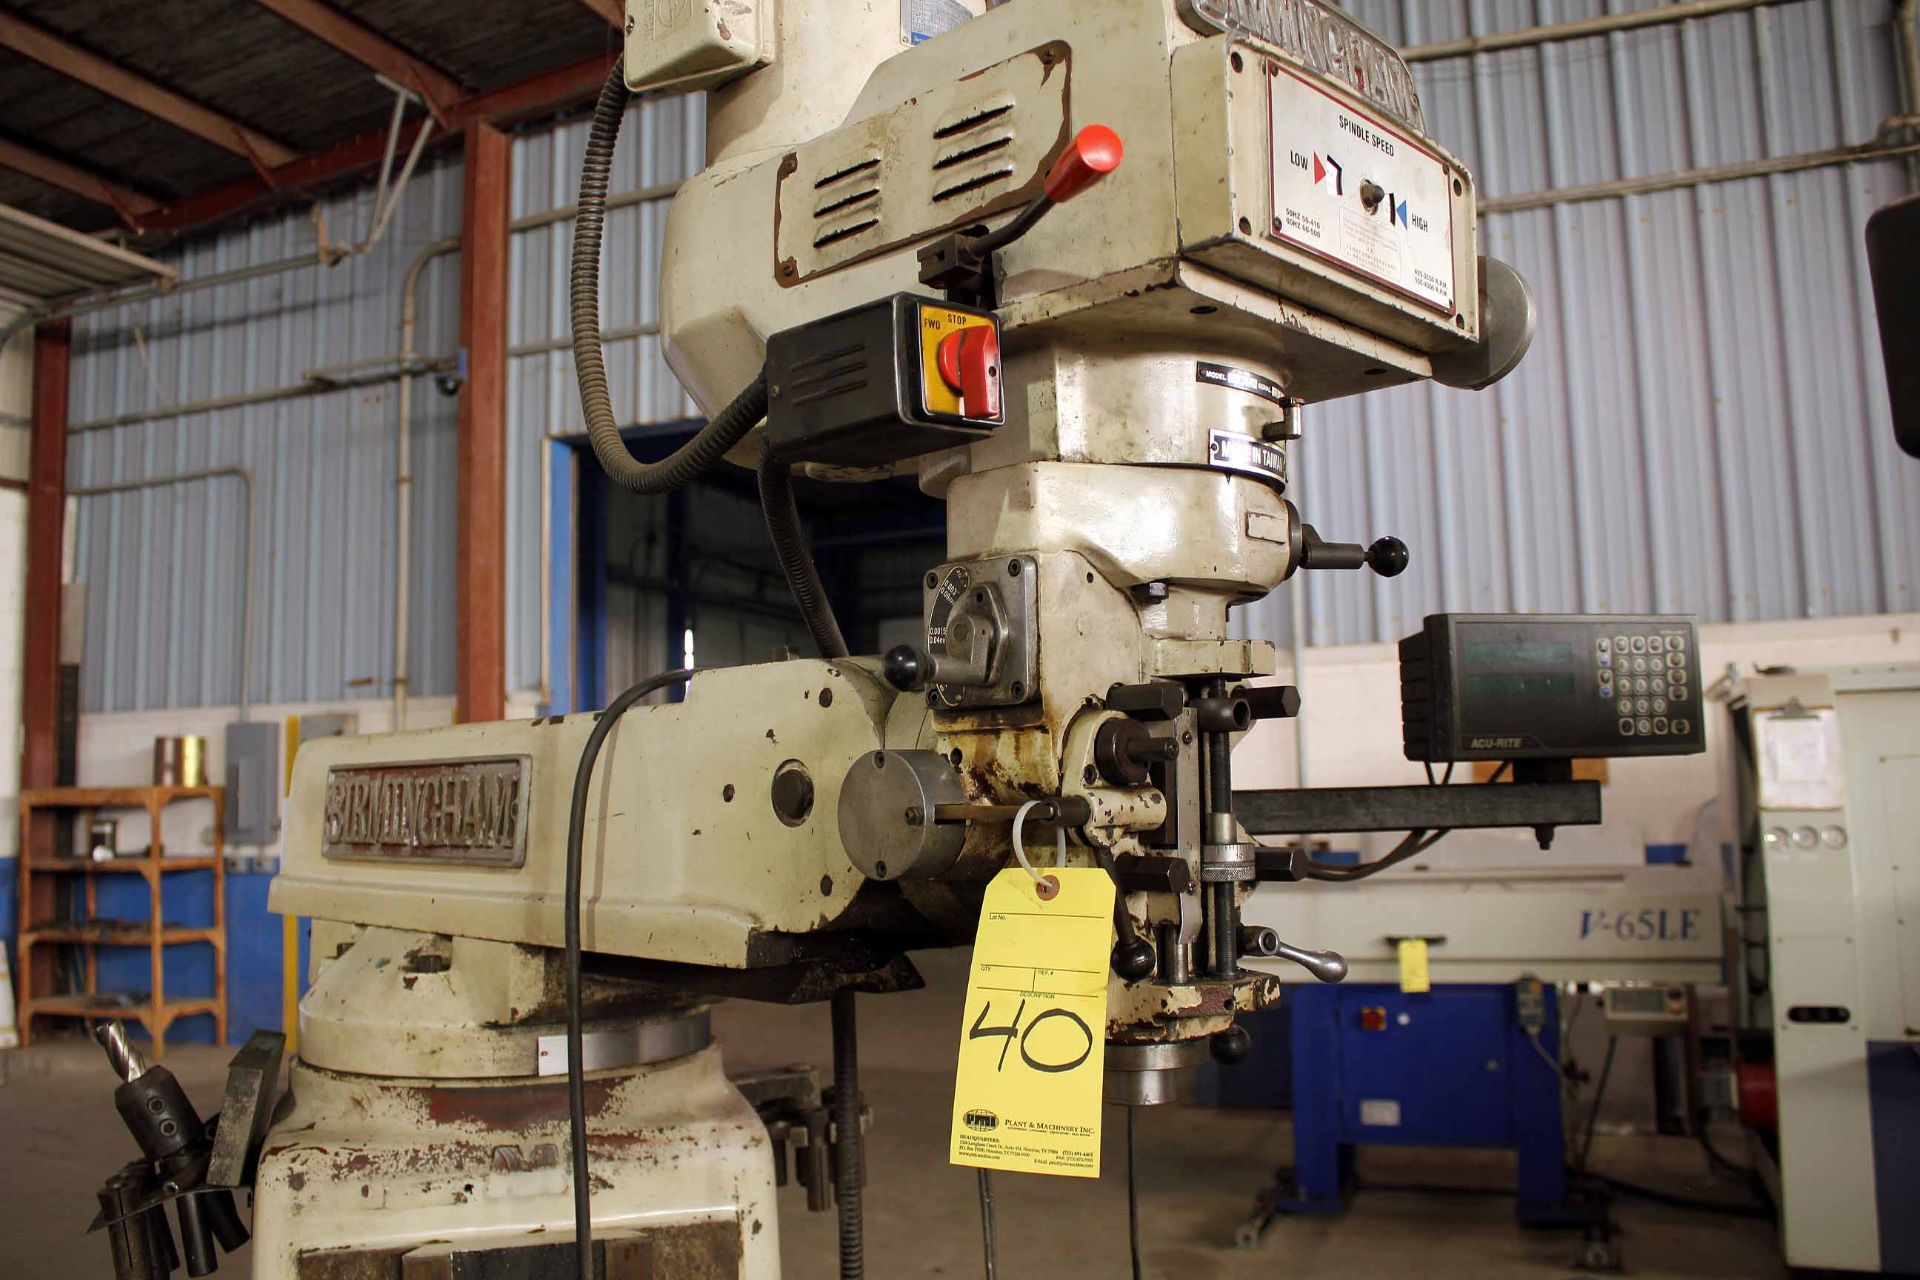 VERTICAL TURRET MILLING MACHINE, BIRMINGHAM MDL. BPV-1054, new 2003, 10" x 54" table, pwr. feed, 2- - Image 2 of 3